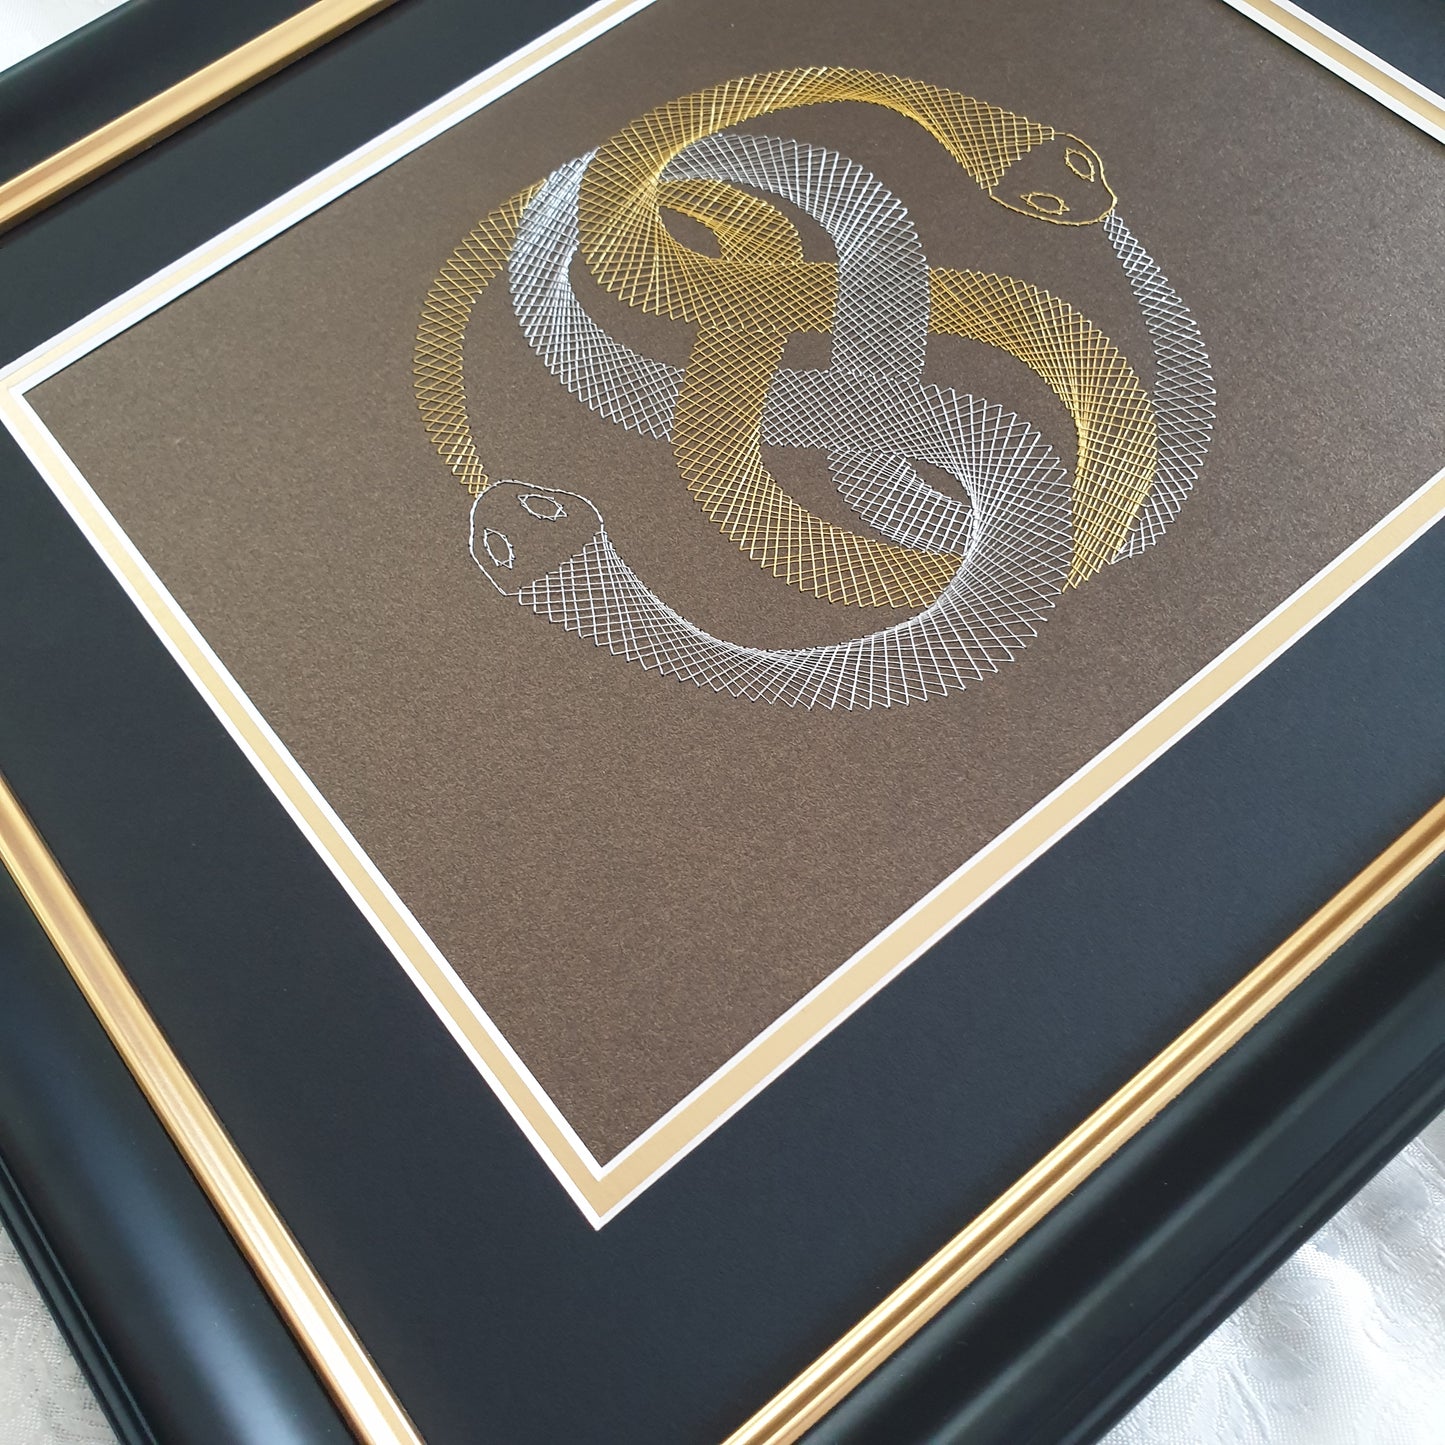 Auryn (The Neverending Story) Inspired Card Embroidery Kit (Brown Card)